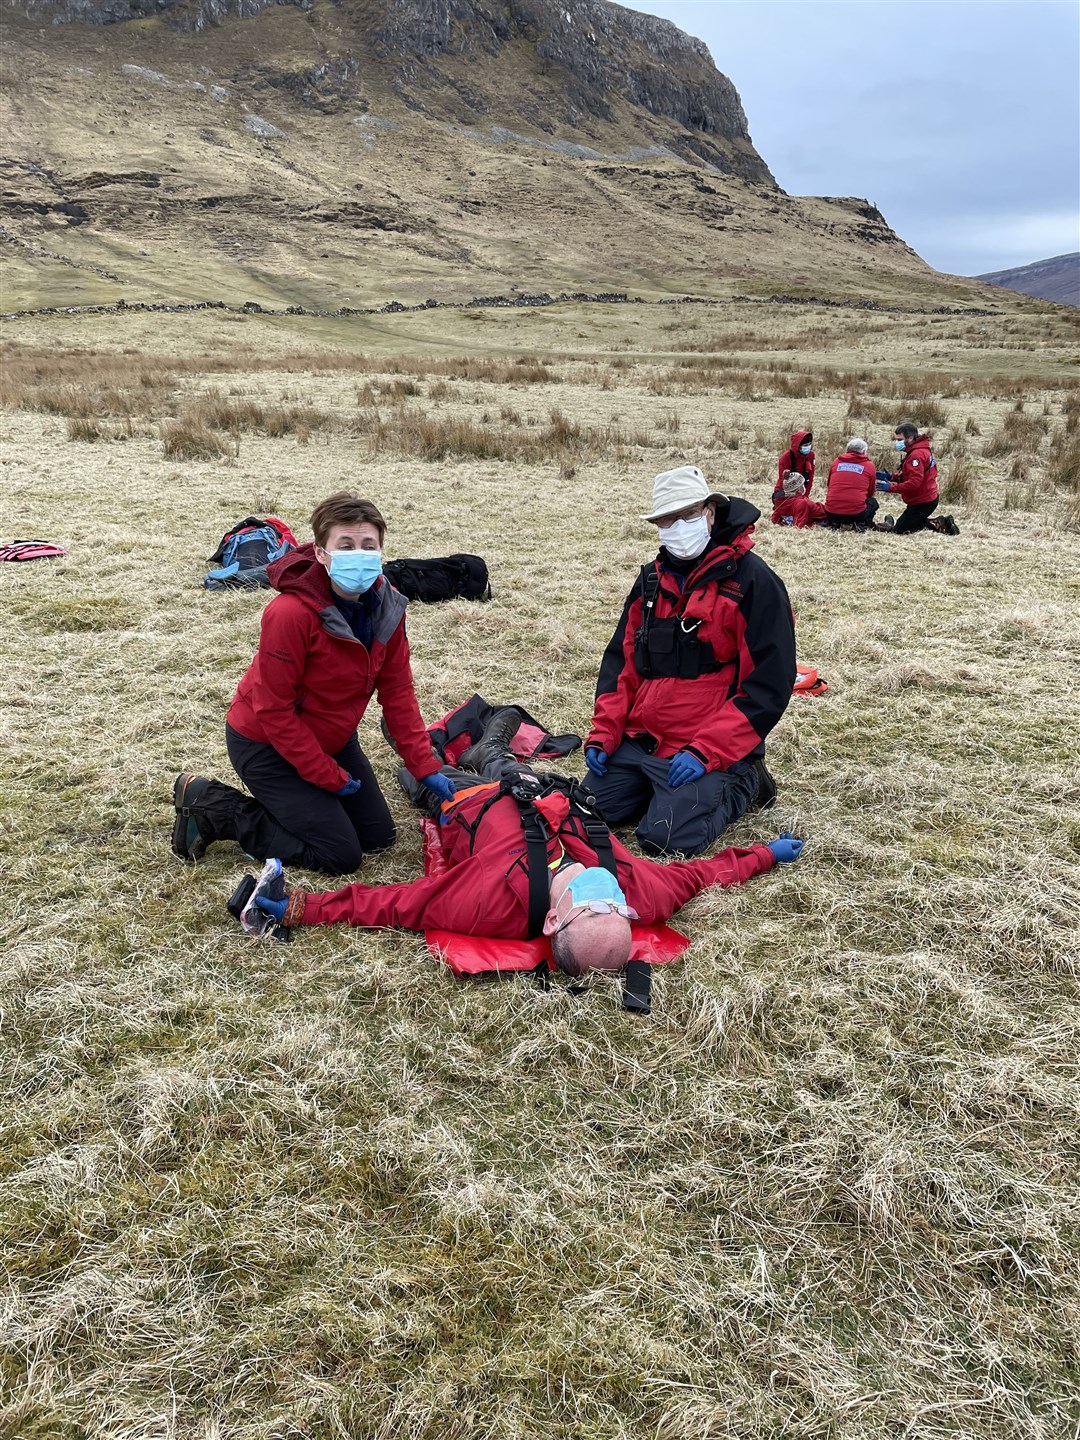 Assynt Mountain Rescue Team in training during the pandemic.